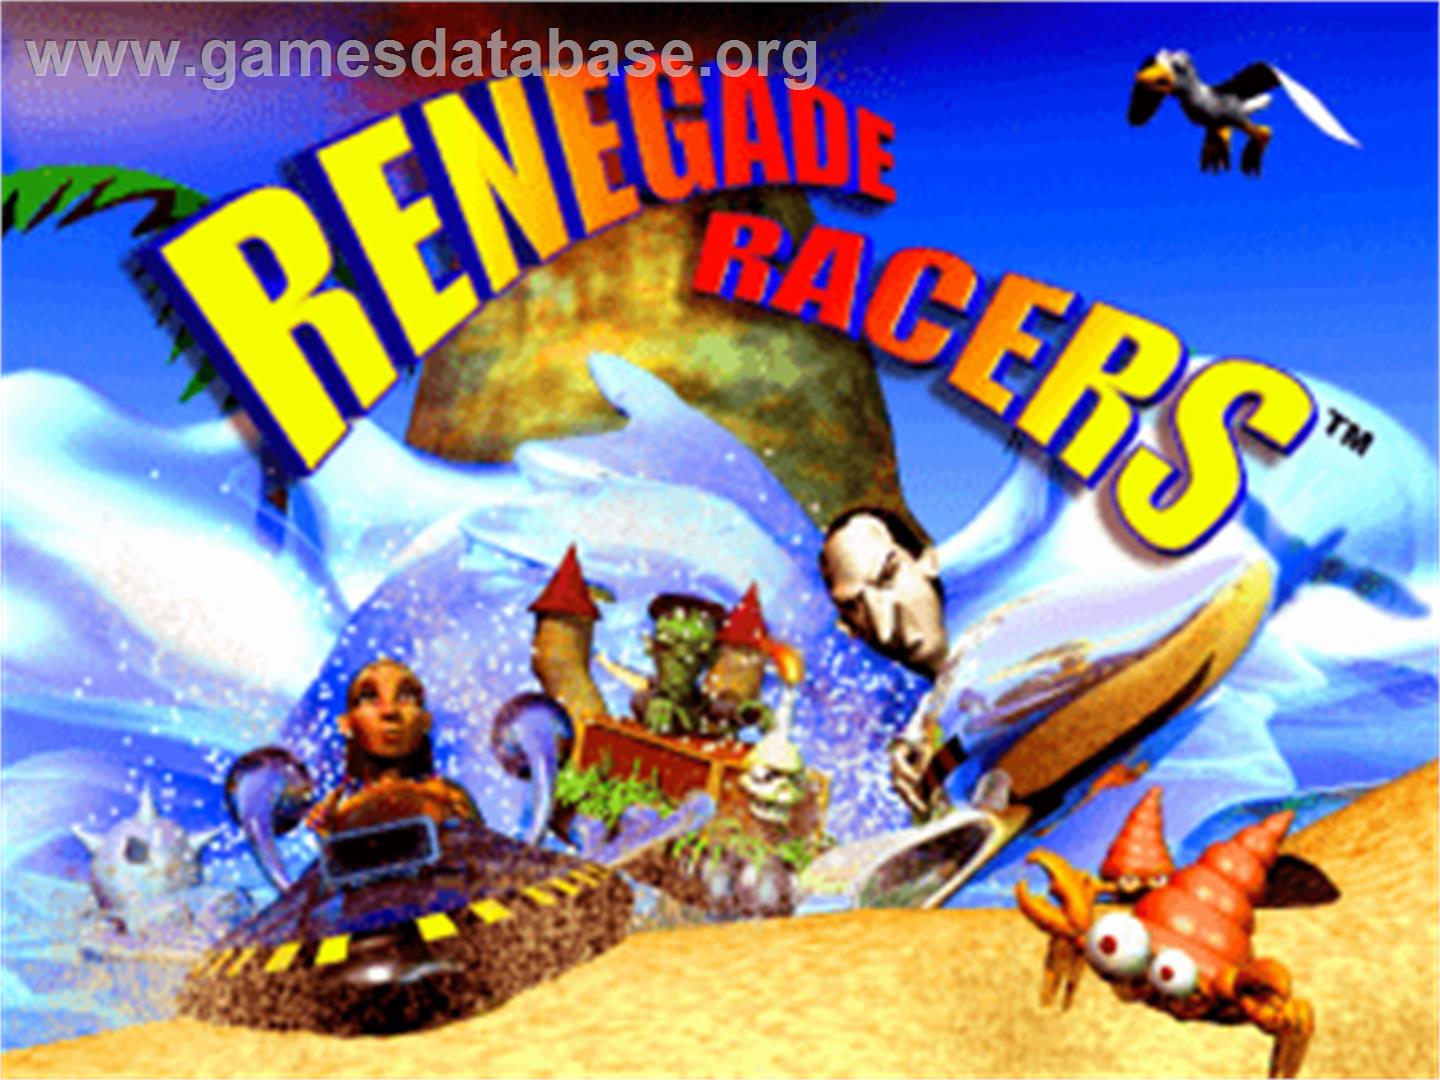 Renegade Racers - Sony Playstation - Artwork - Title Screen